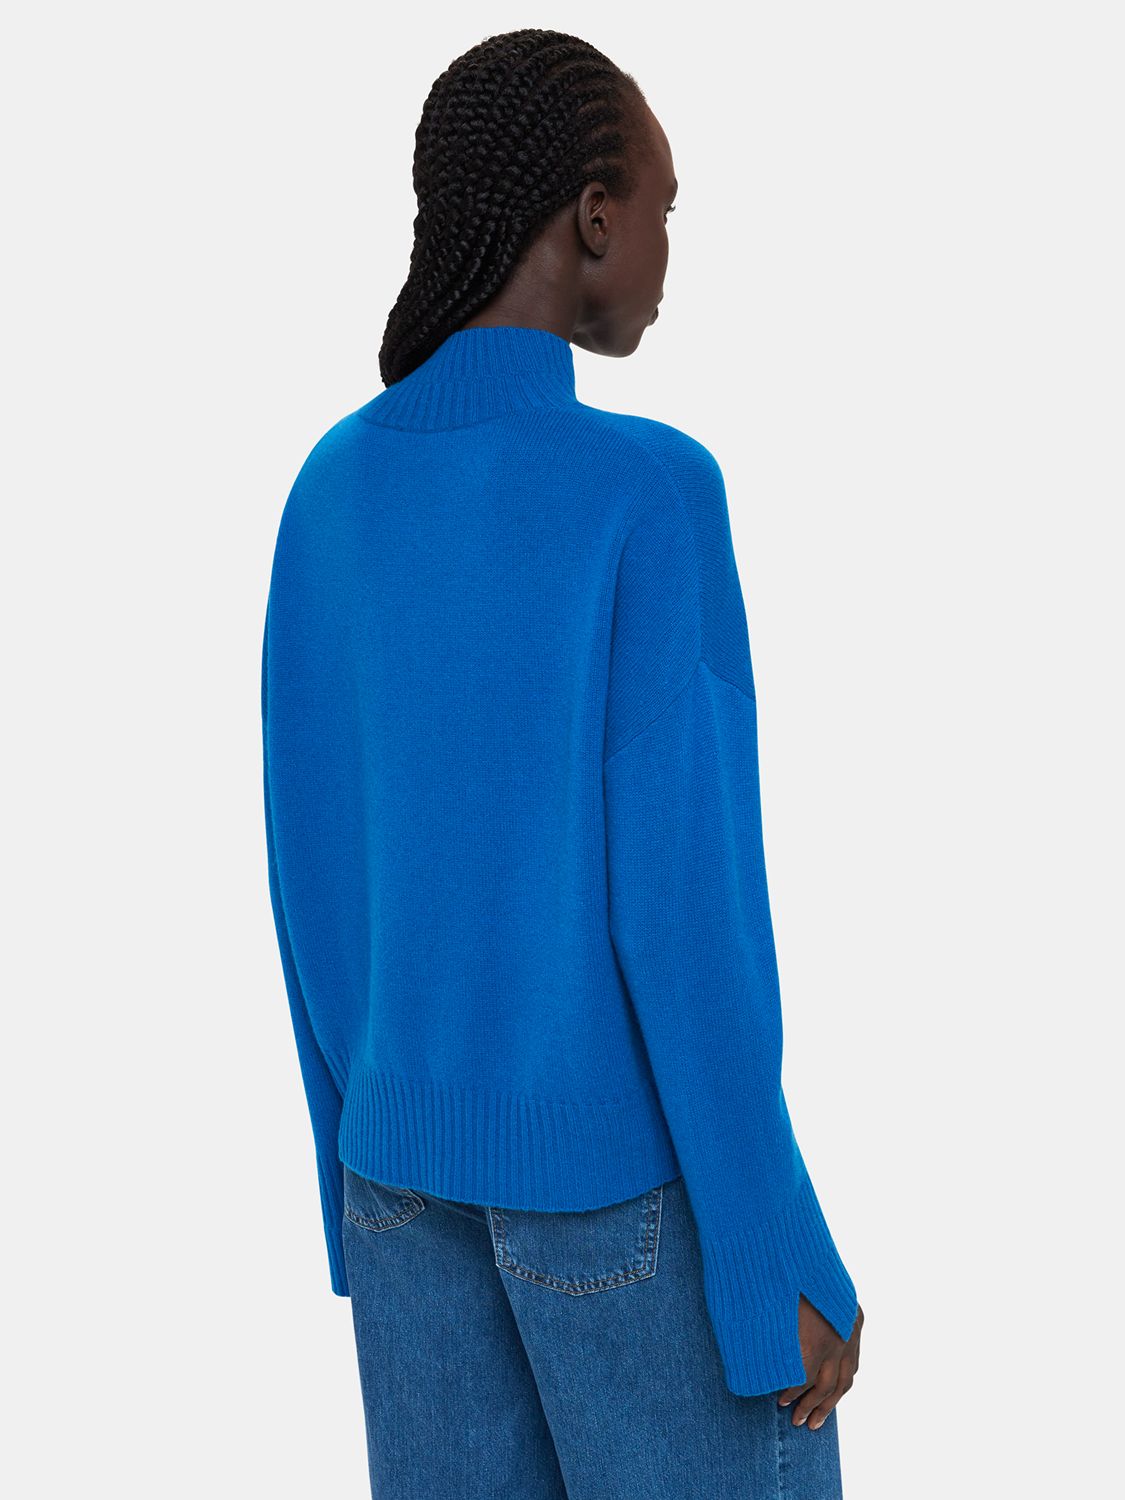 Whistles Wool Double Trim Funnel Neck Jumper, Blue, S